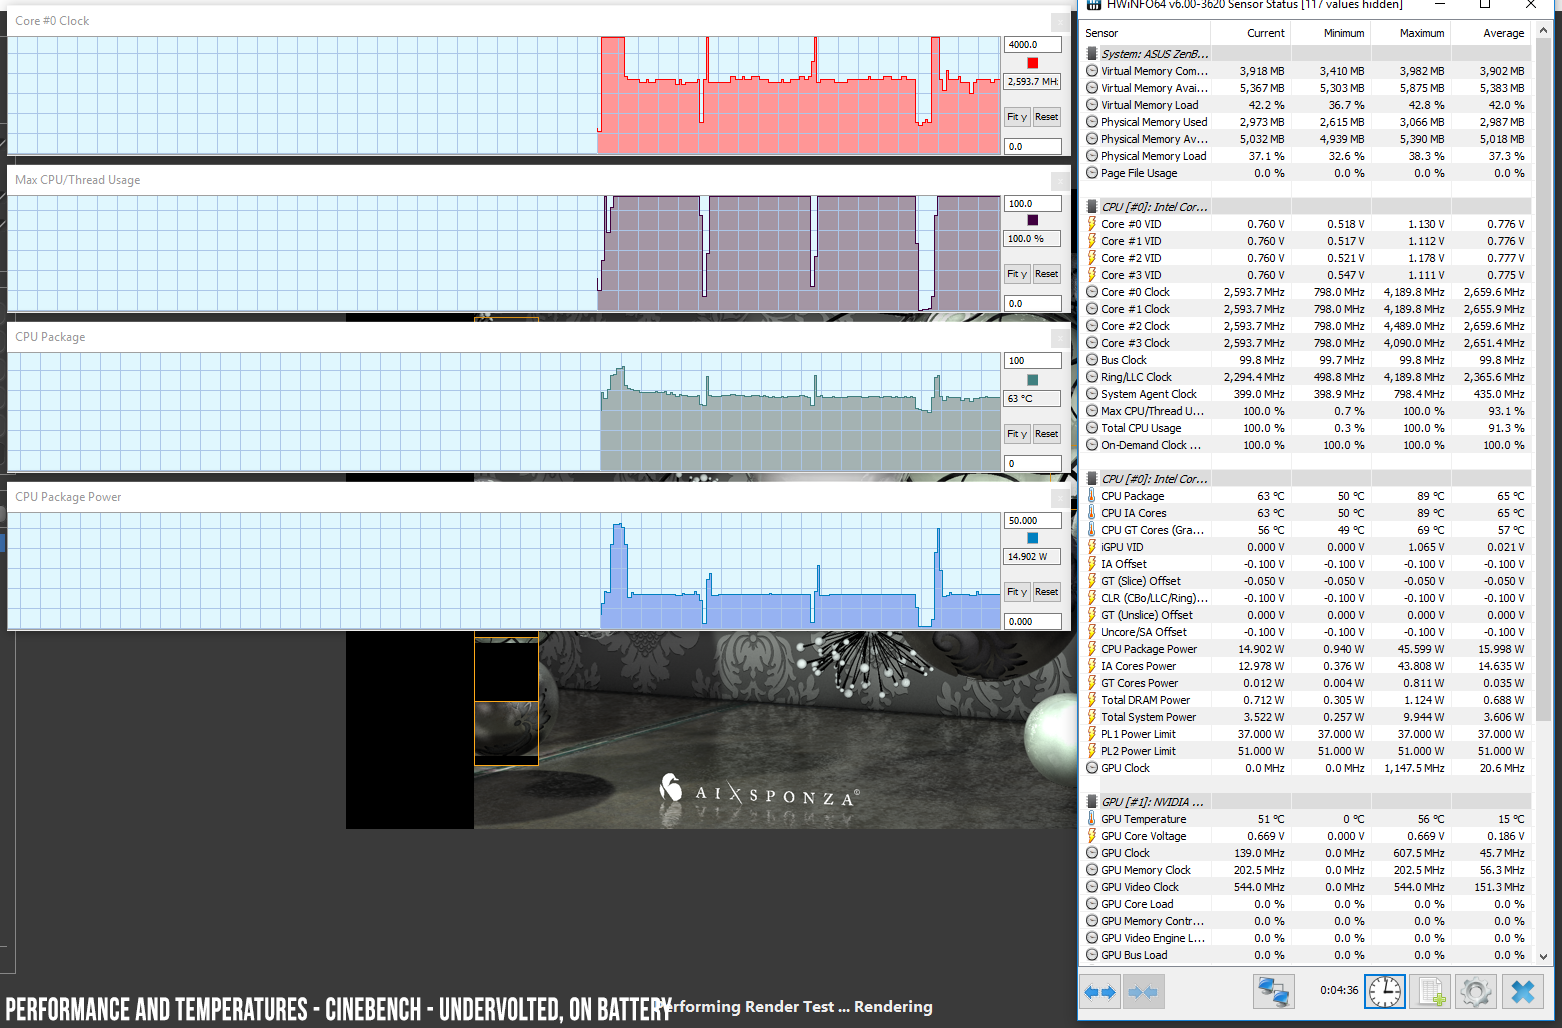 perf temps cinebench undervolted battery